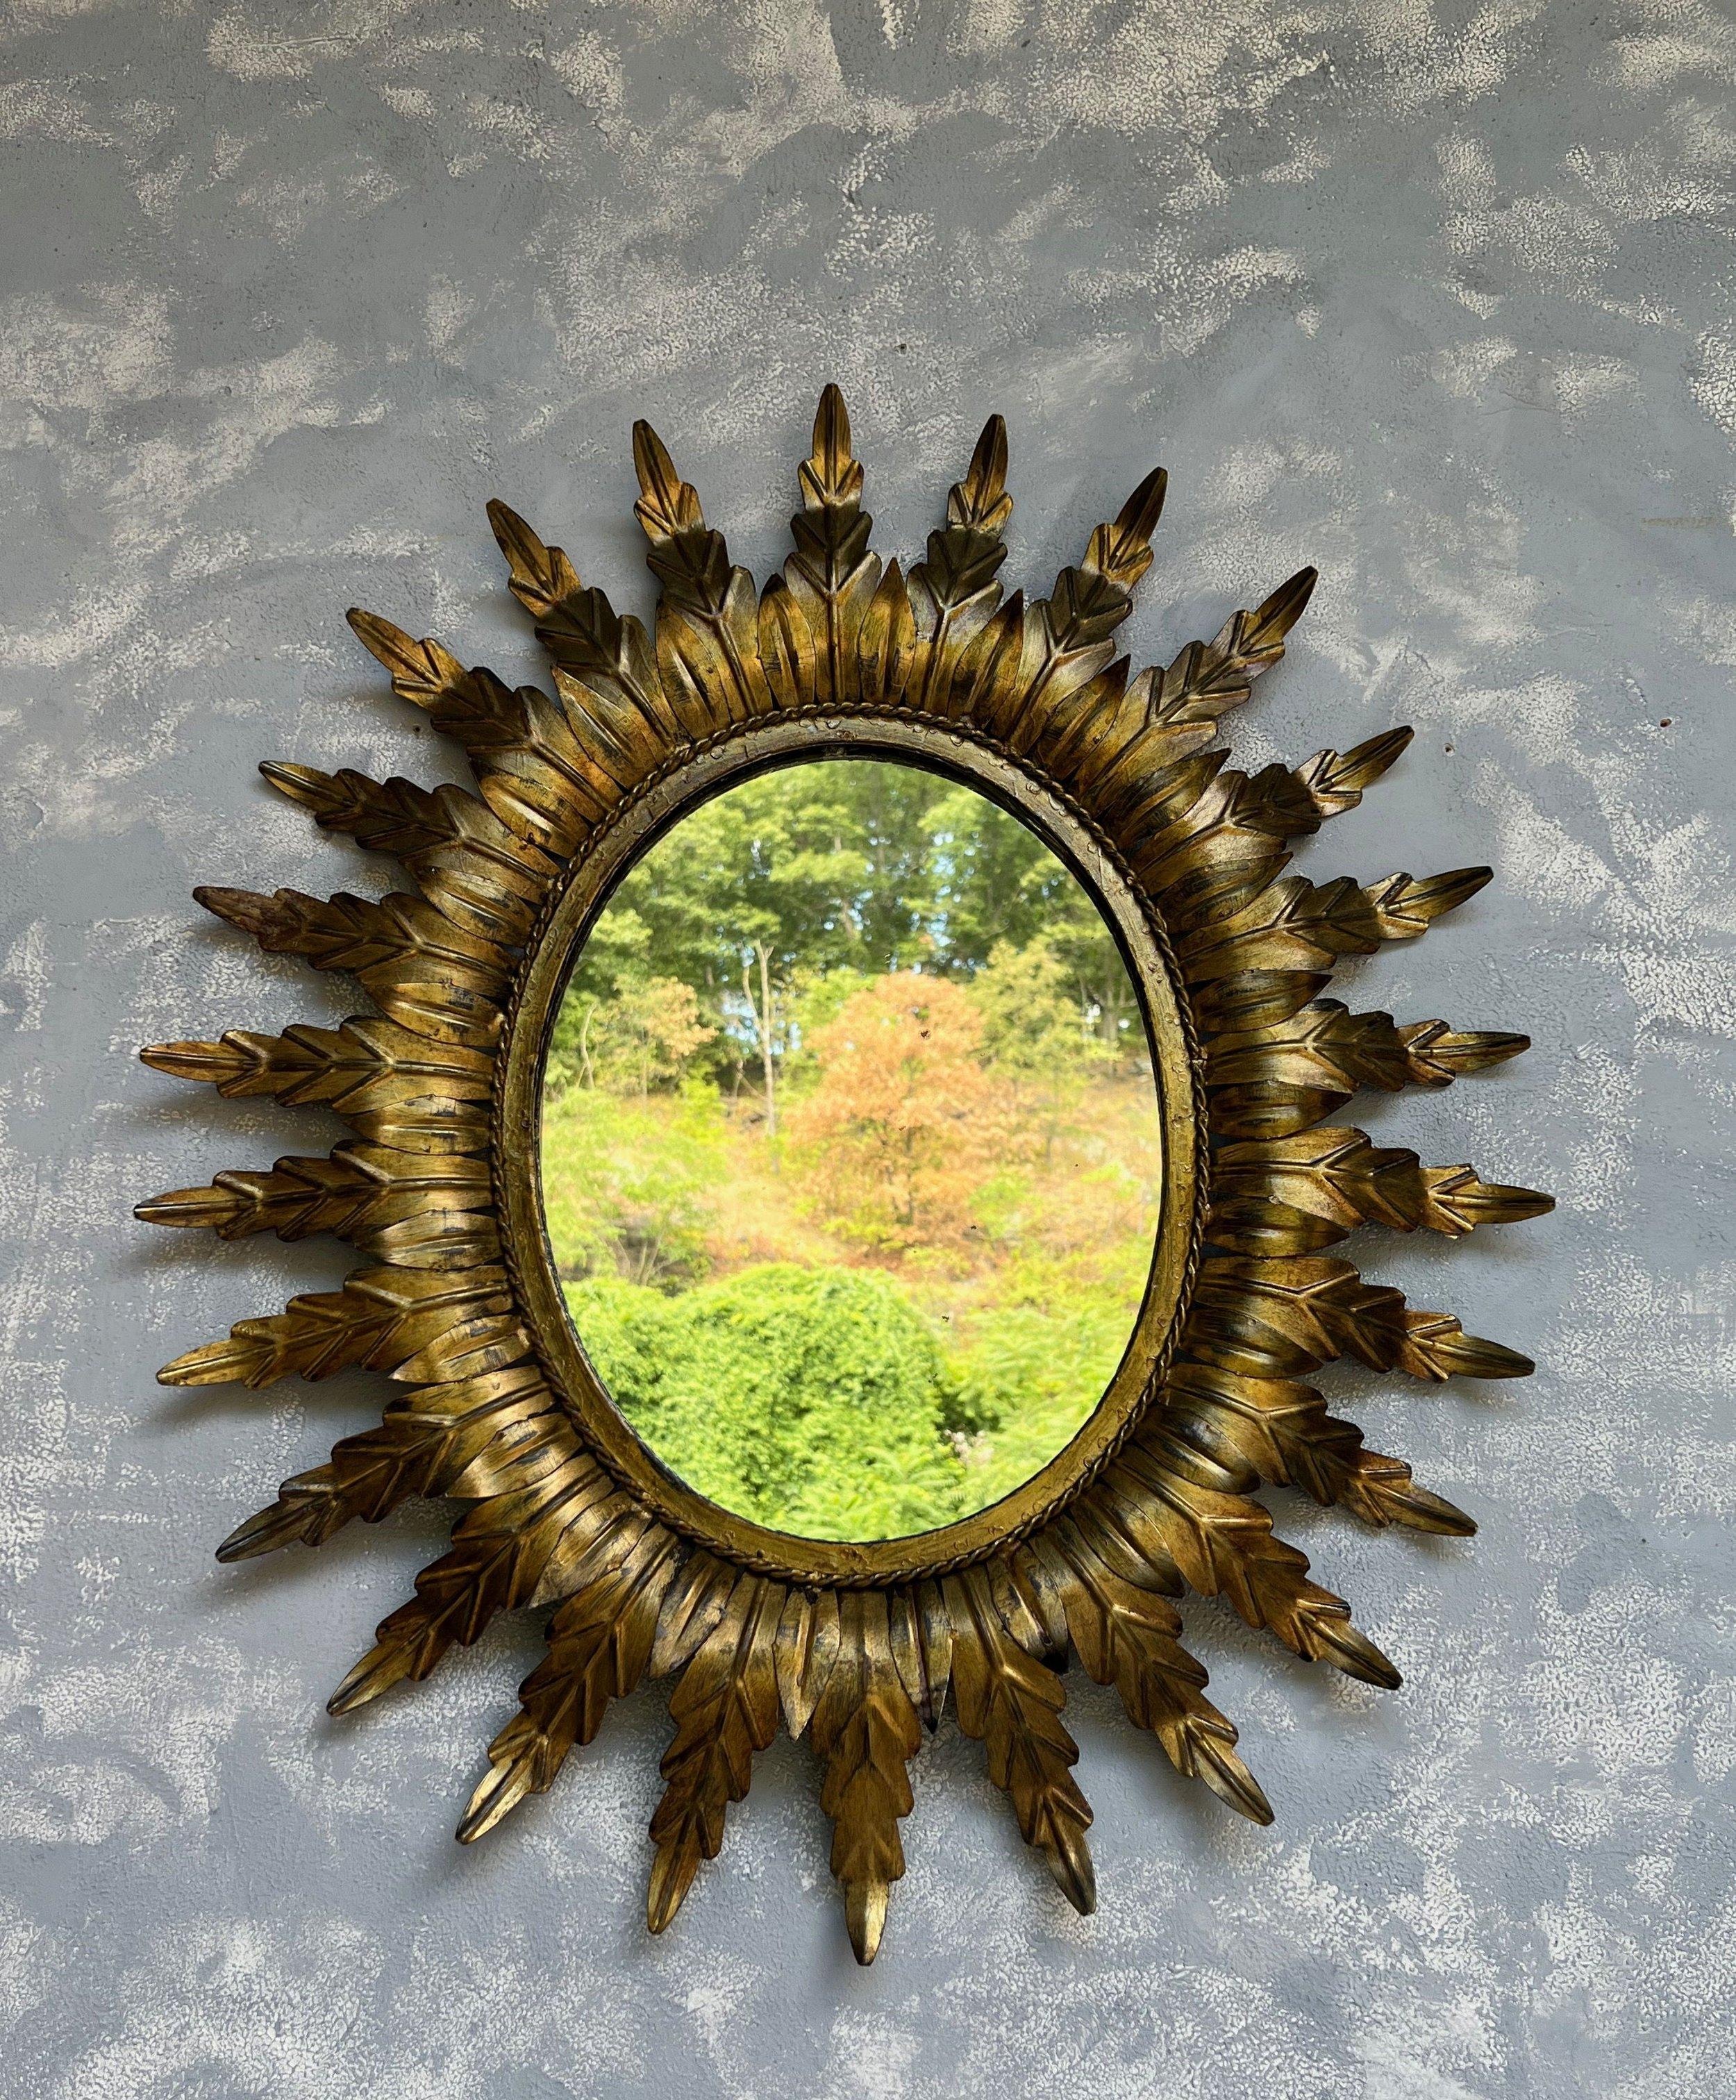 A large mid century oval sunburst mirror with radiating leaves surrounding a braided frame in a rich gilt patina. We recently added a felt backing to the mirror to give it more protection and a finished look. 

Spanish, 1950s. Very good vintage